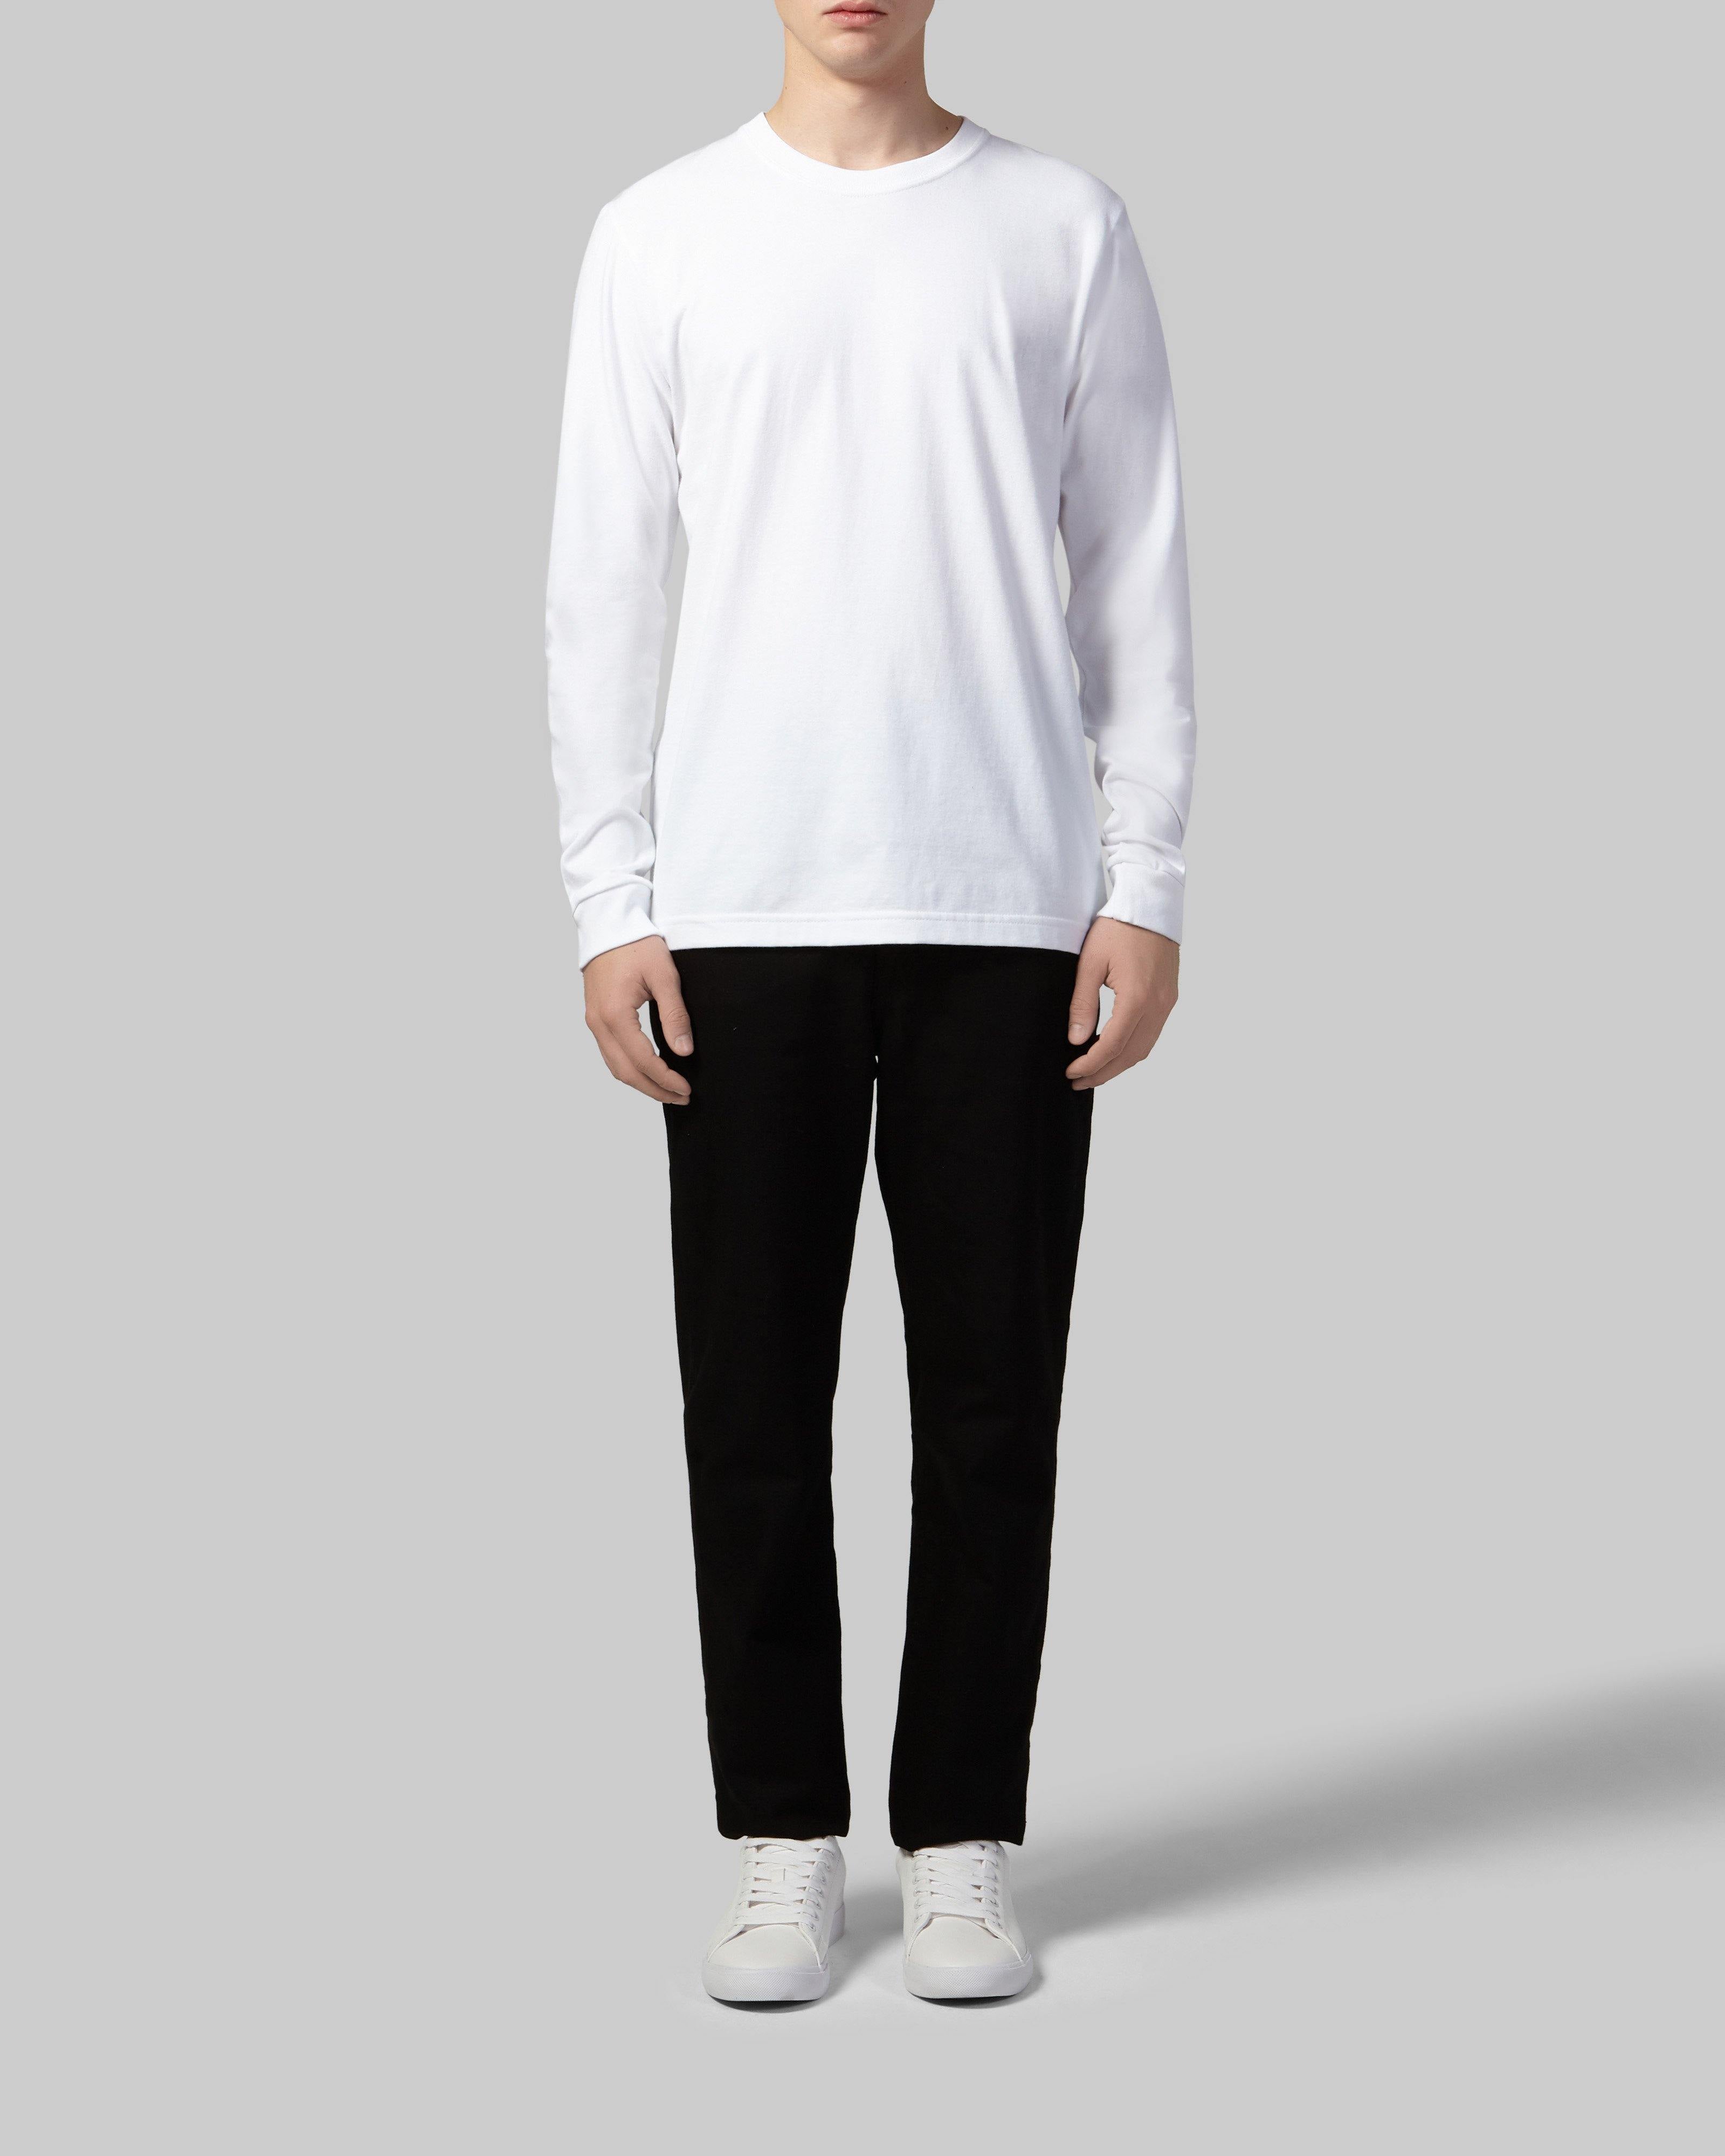 Long Sleeve T in Heavyweight American Cotton - 457 ANEW | Atelier IV V VII Inc.